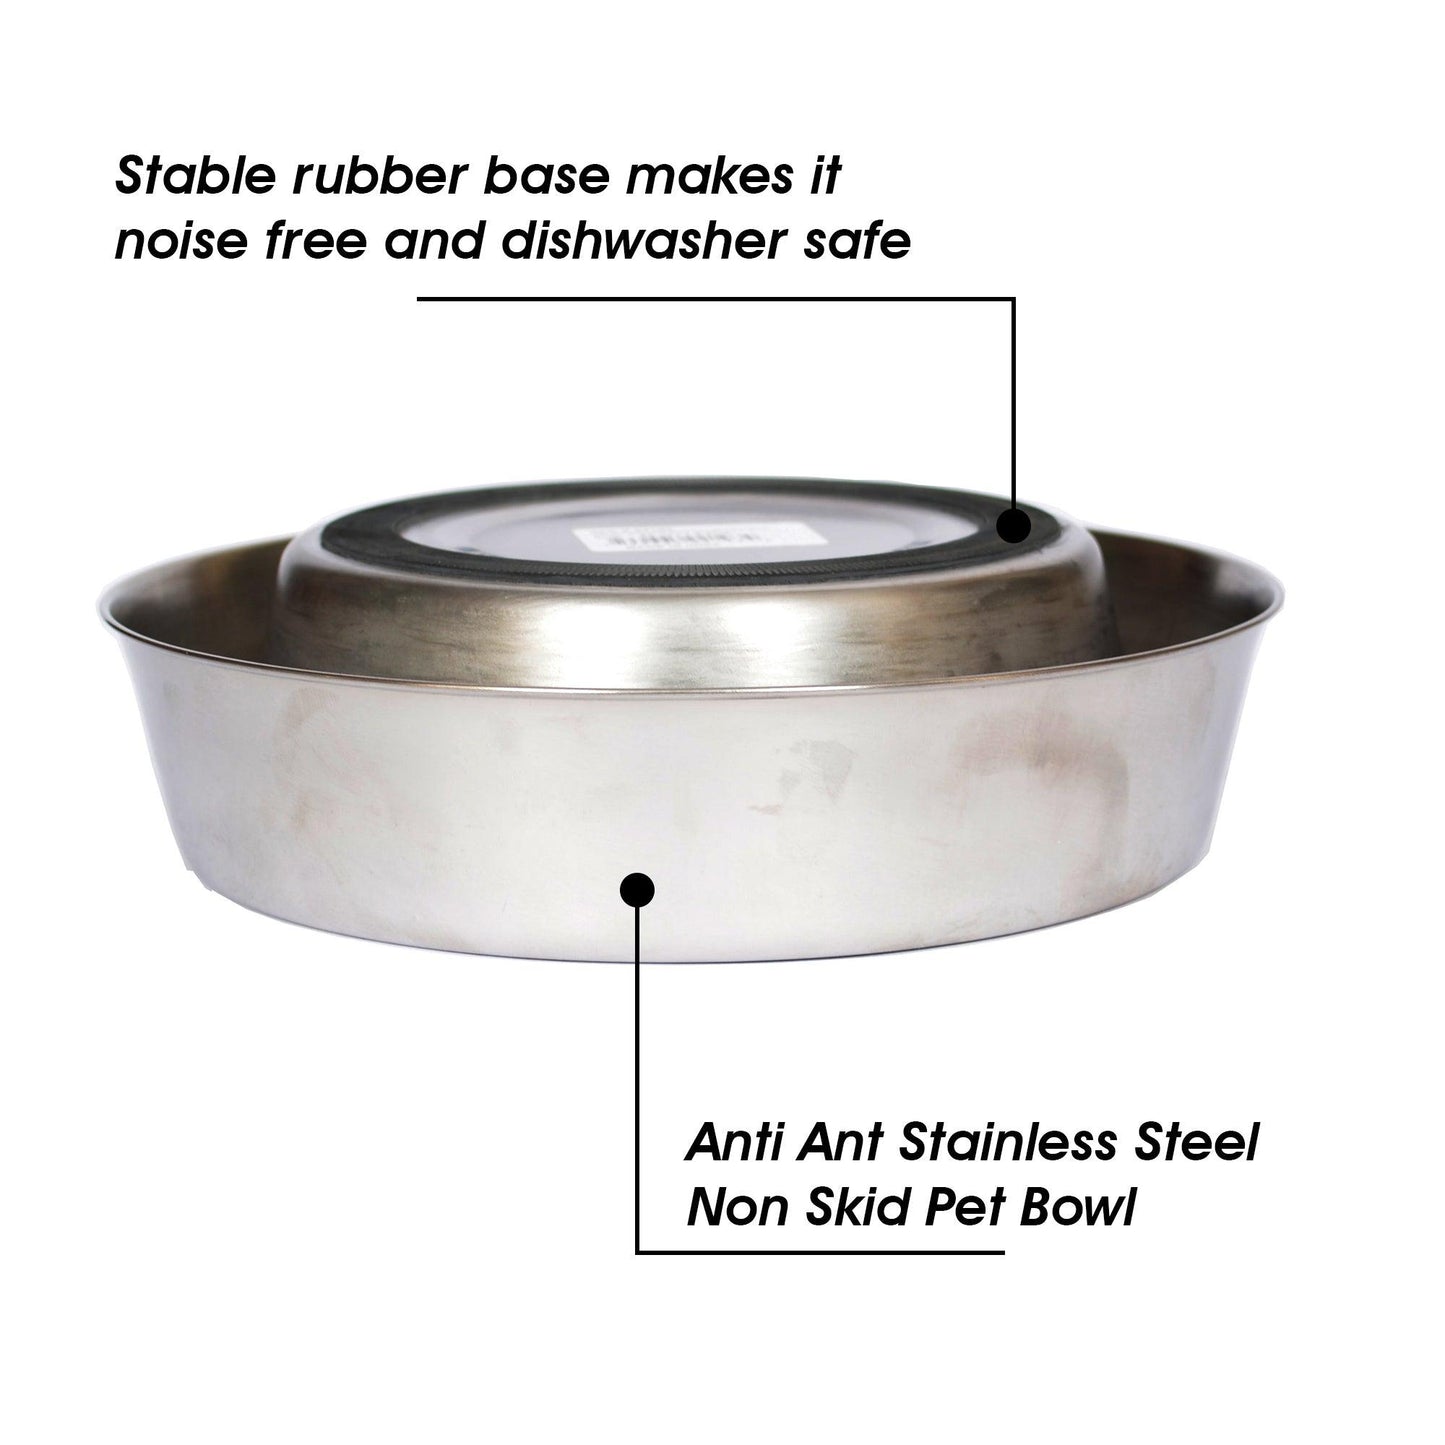 Anti Ant Stainless Steel Non Skid Pet Bowl for Dog or Cat